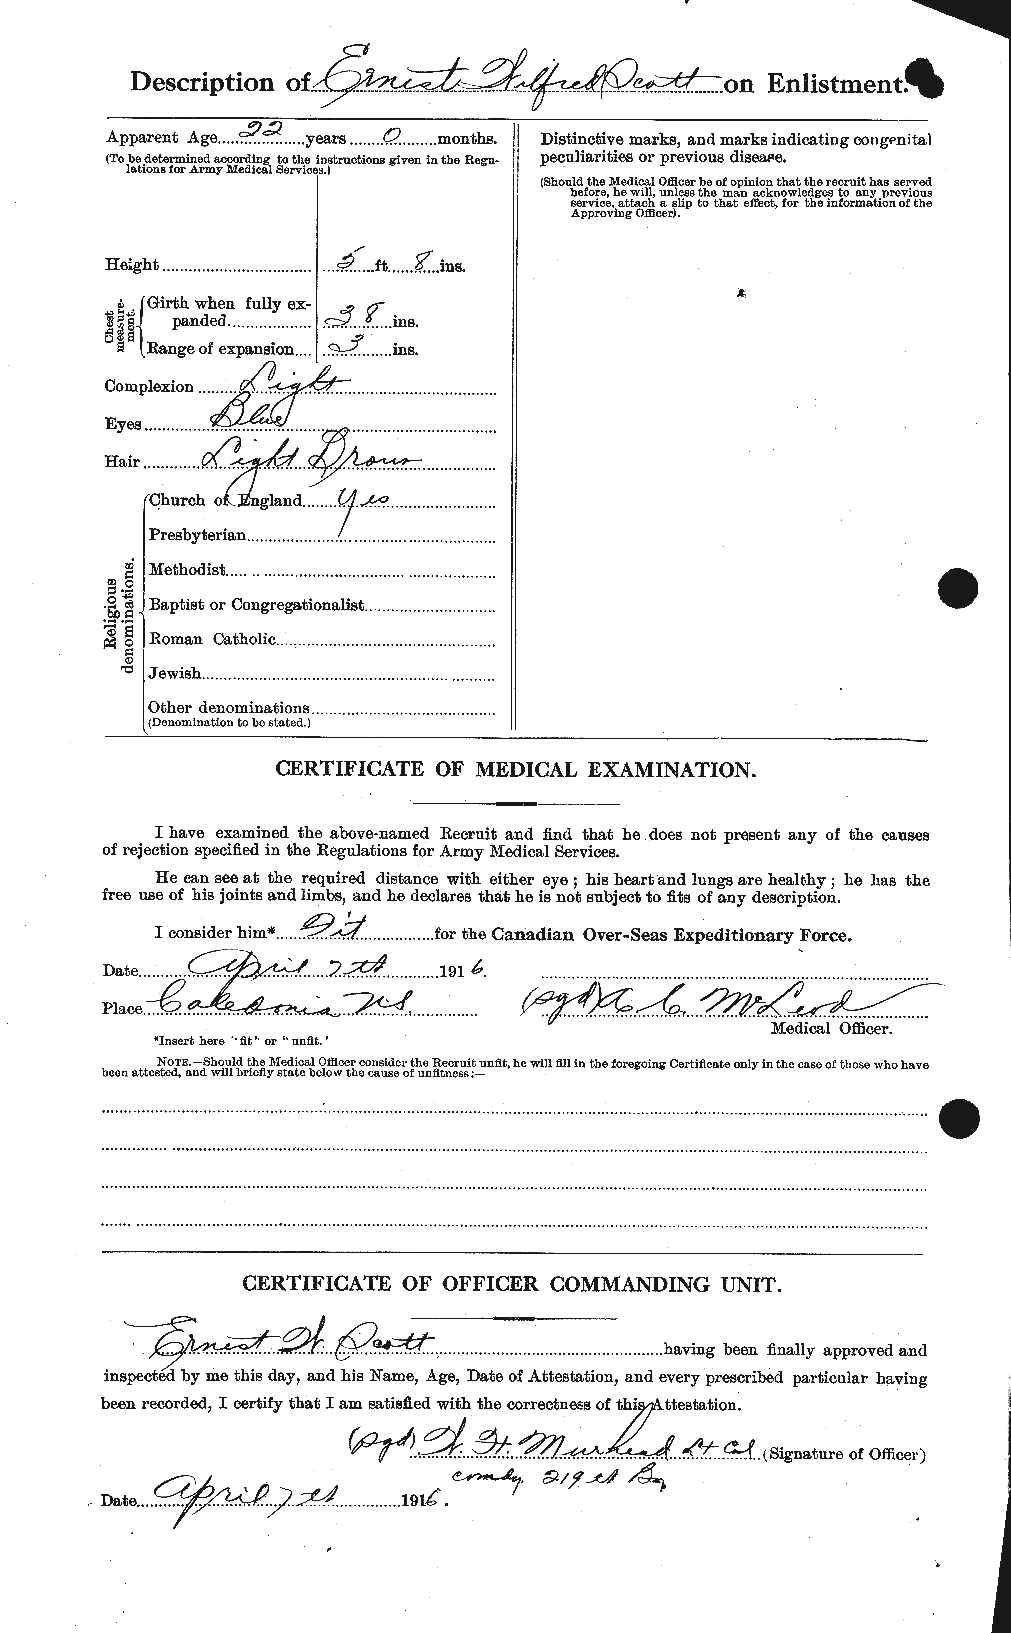 Personnel Records of the First World War - CEF 085003b